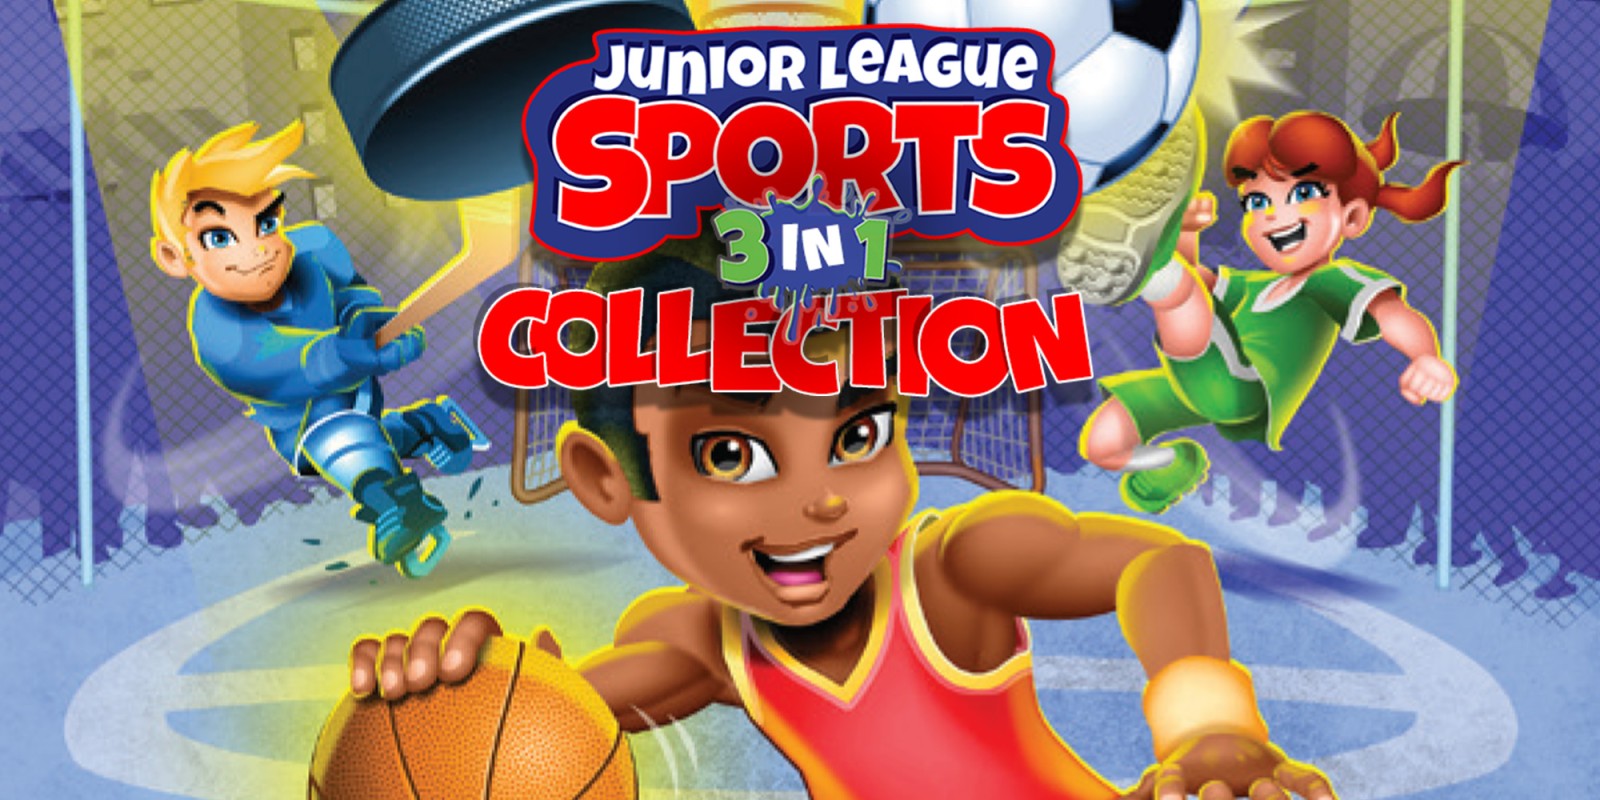 Junior League Sports 3-in-1 Collection